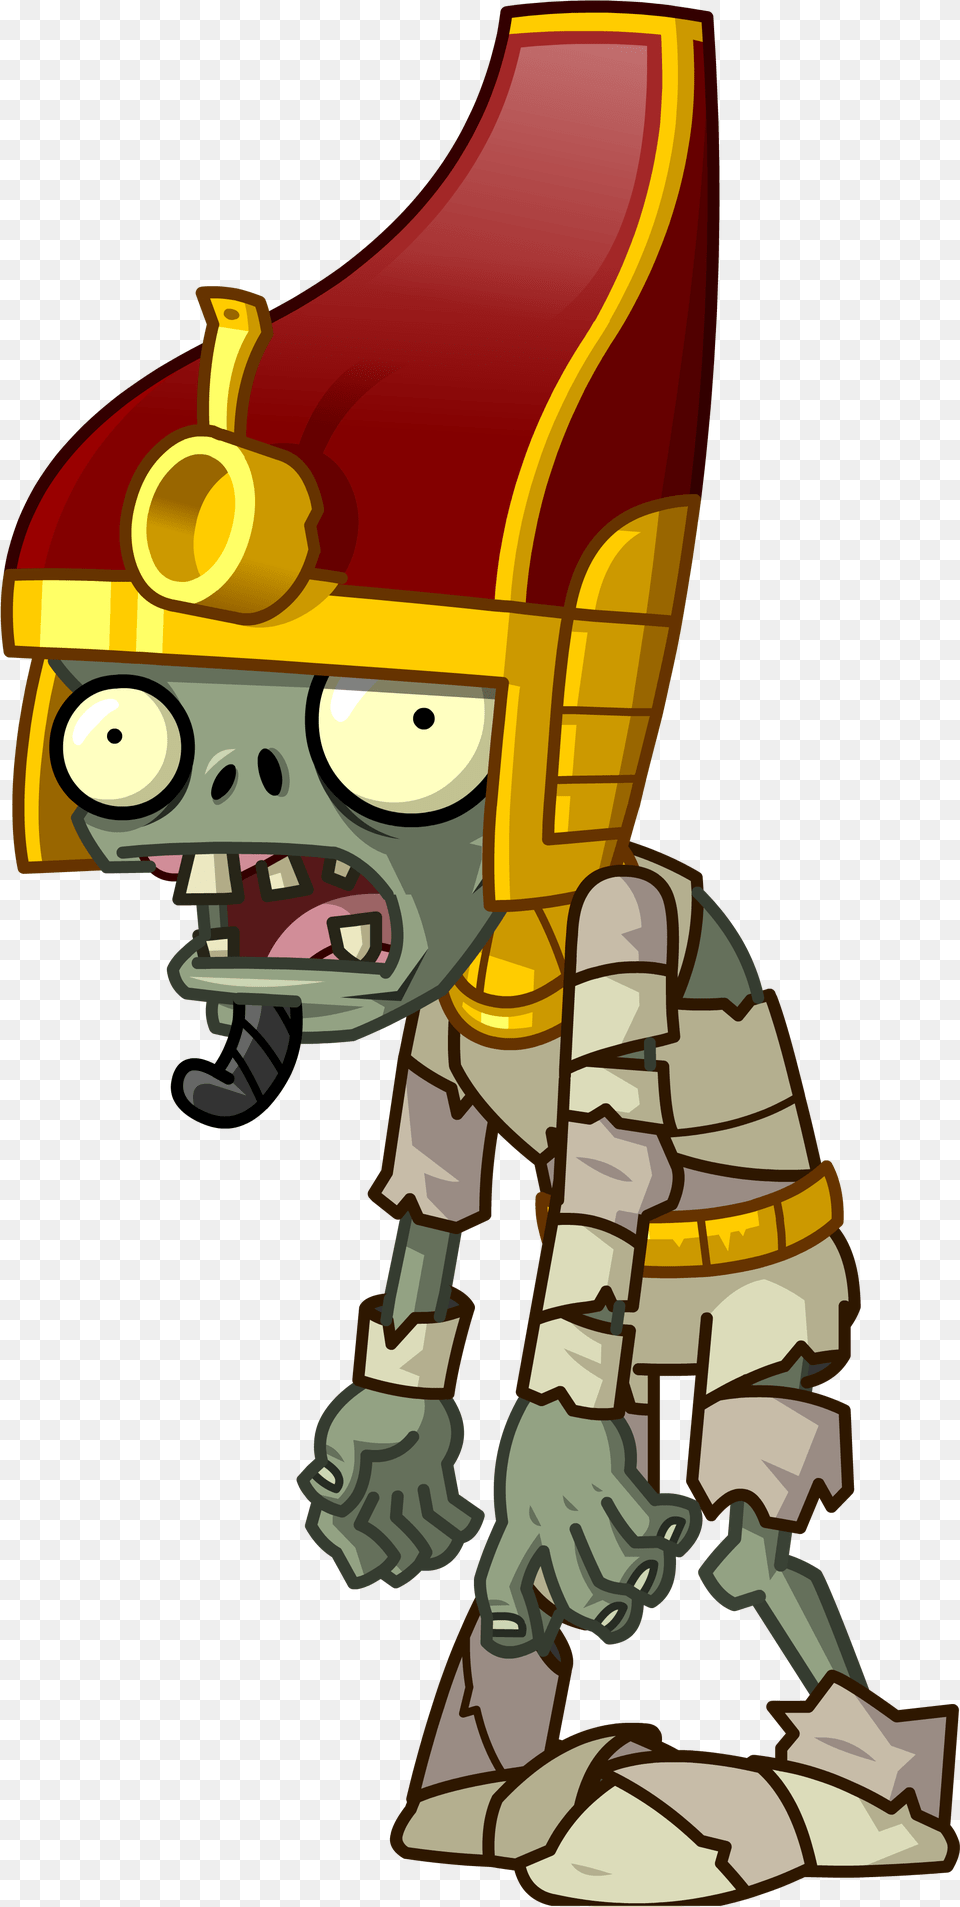 Plants Vs Zombies Zombies In Plant Vs Zombies, Dynamite, Weapon, Cartoon Free Png